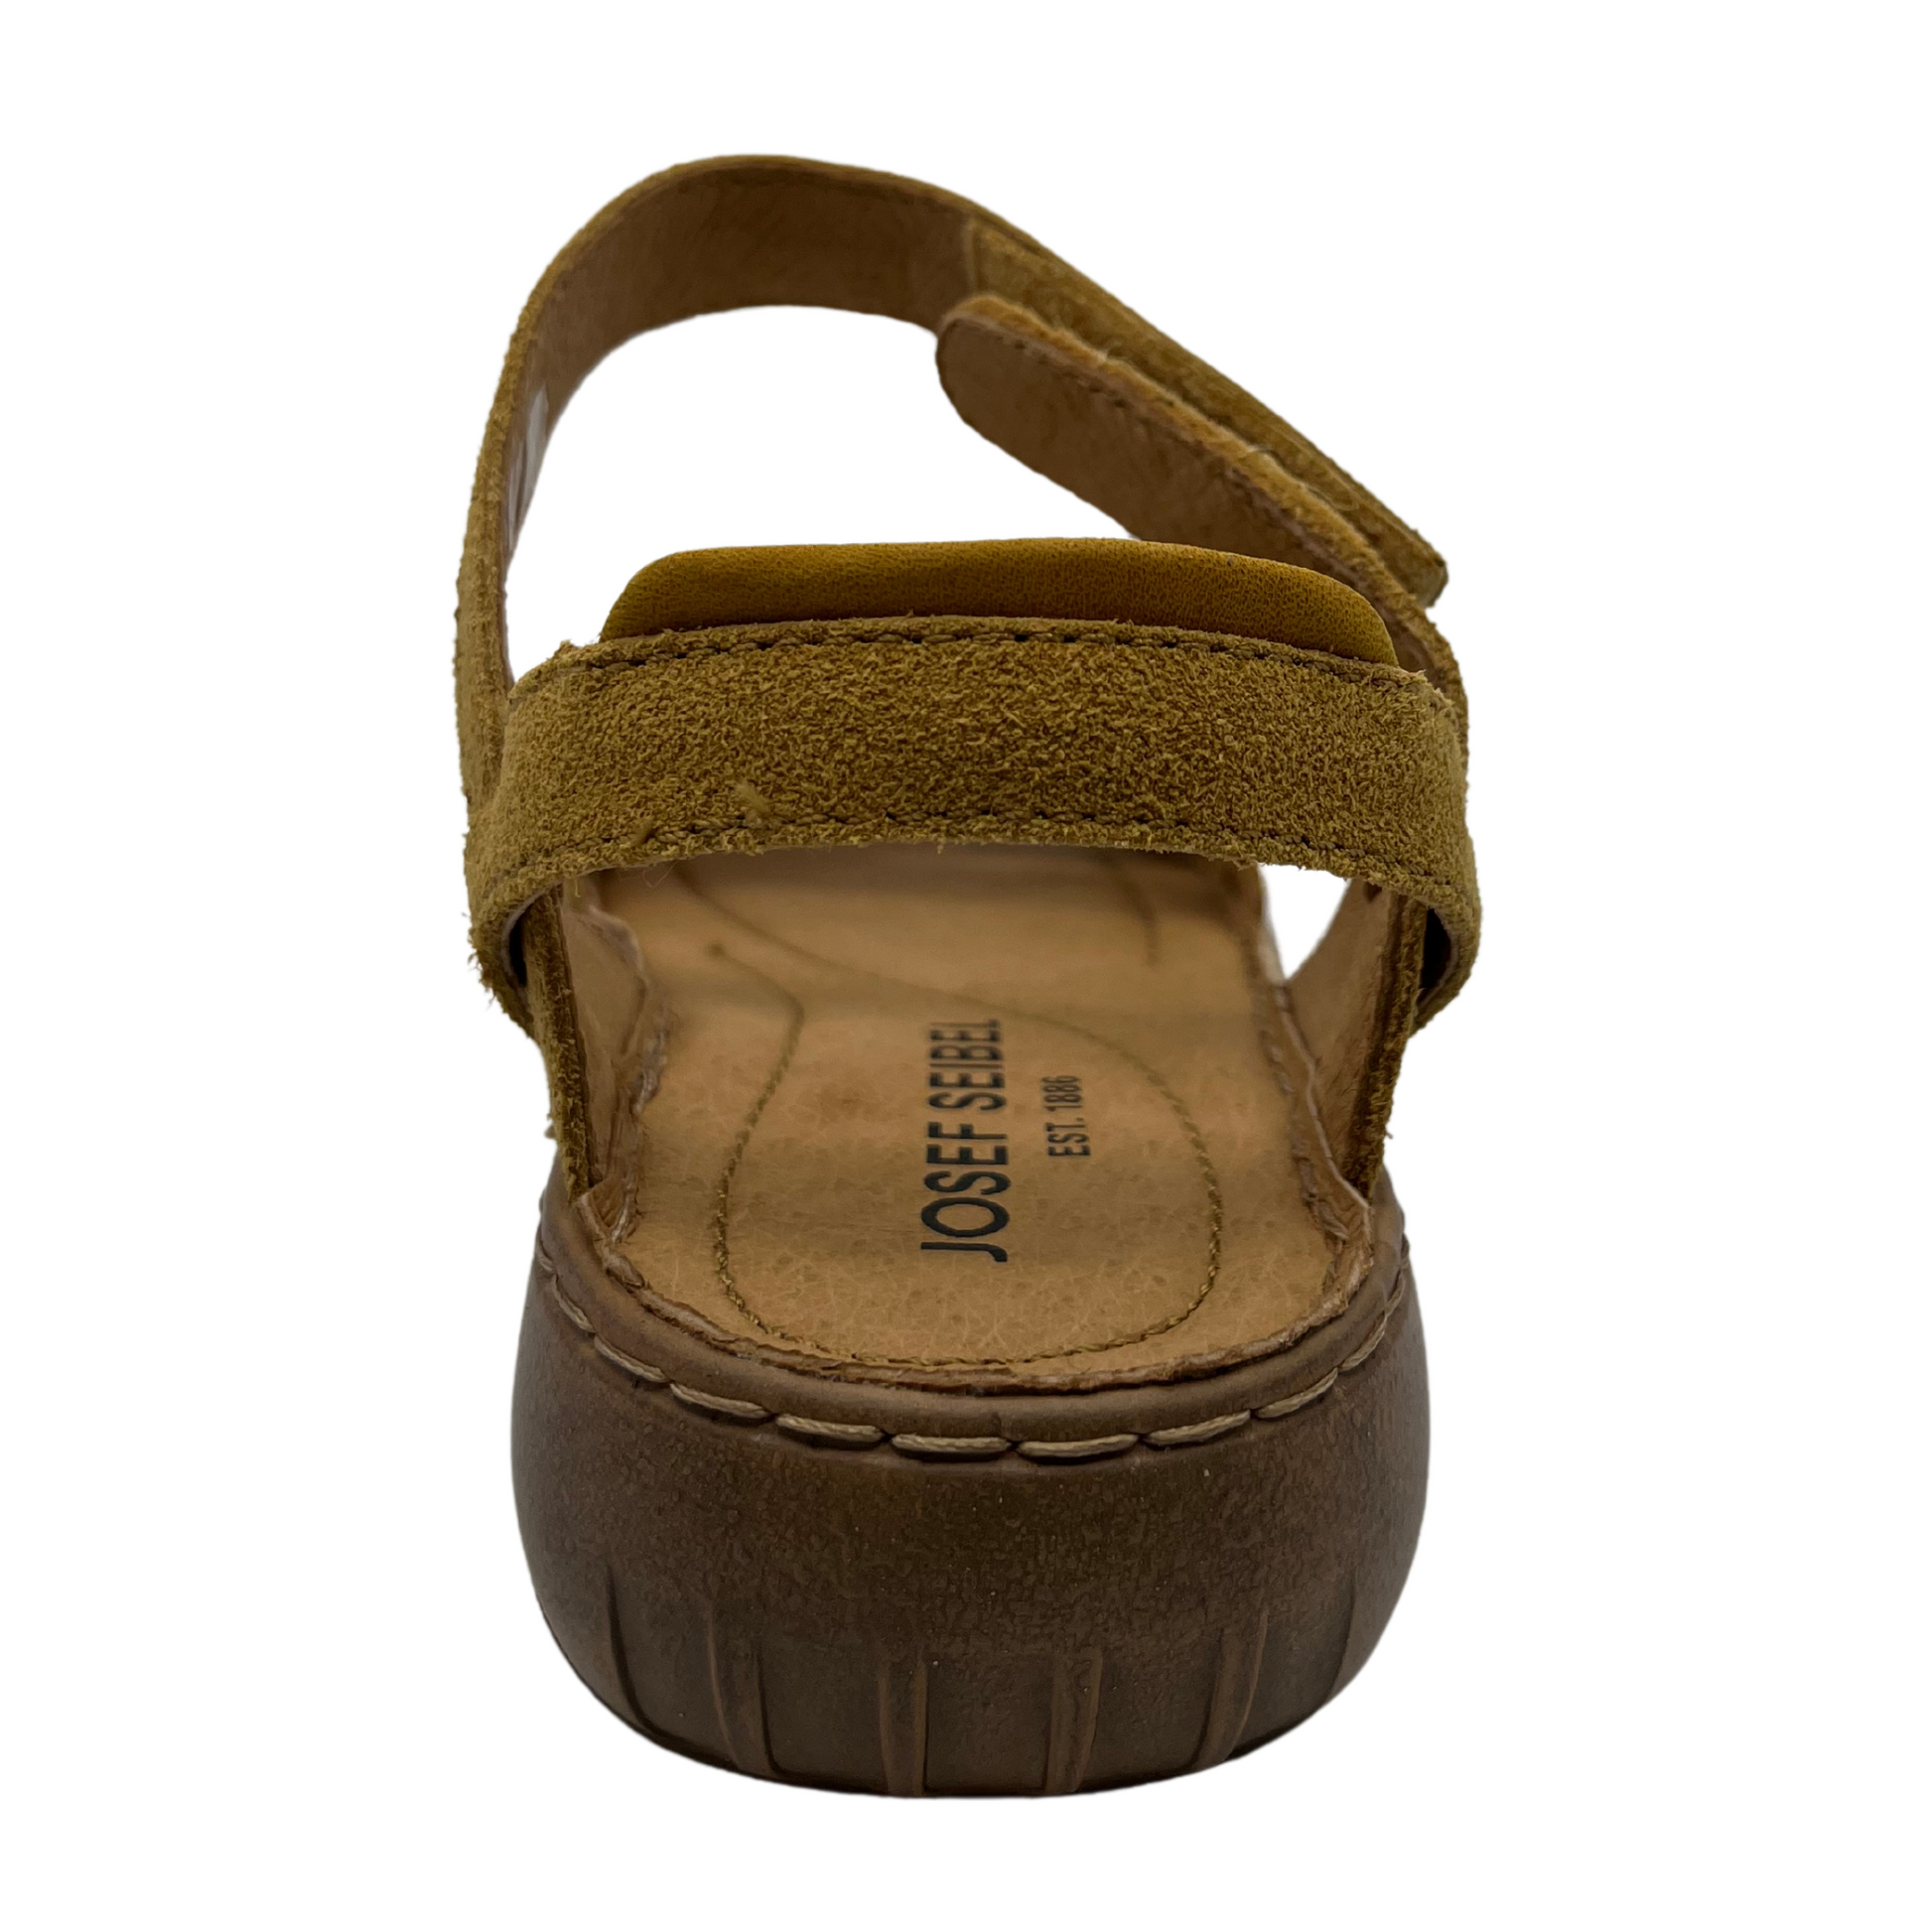 Back view of tan leather suede sandal with multiple adjustable straps and open toe